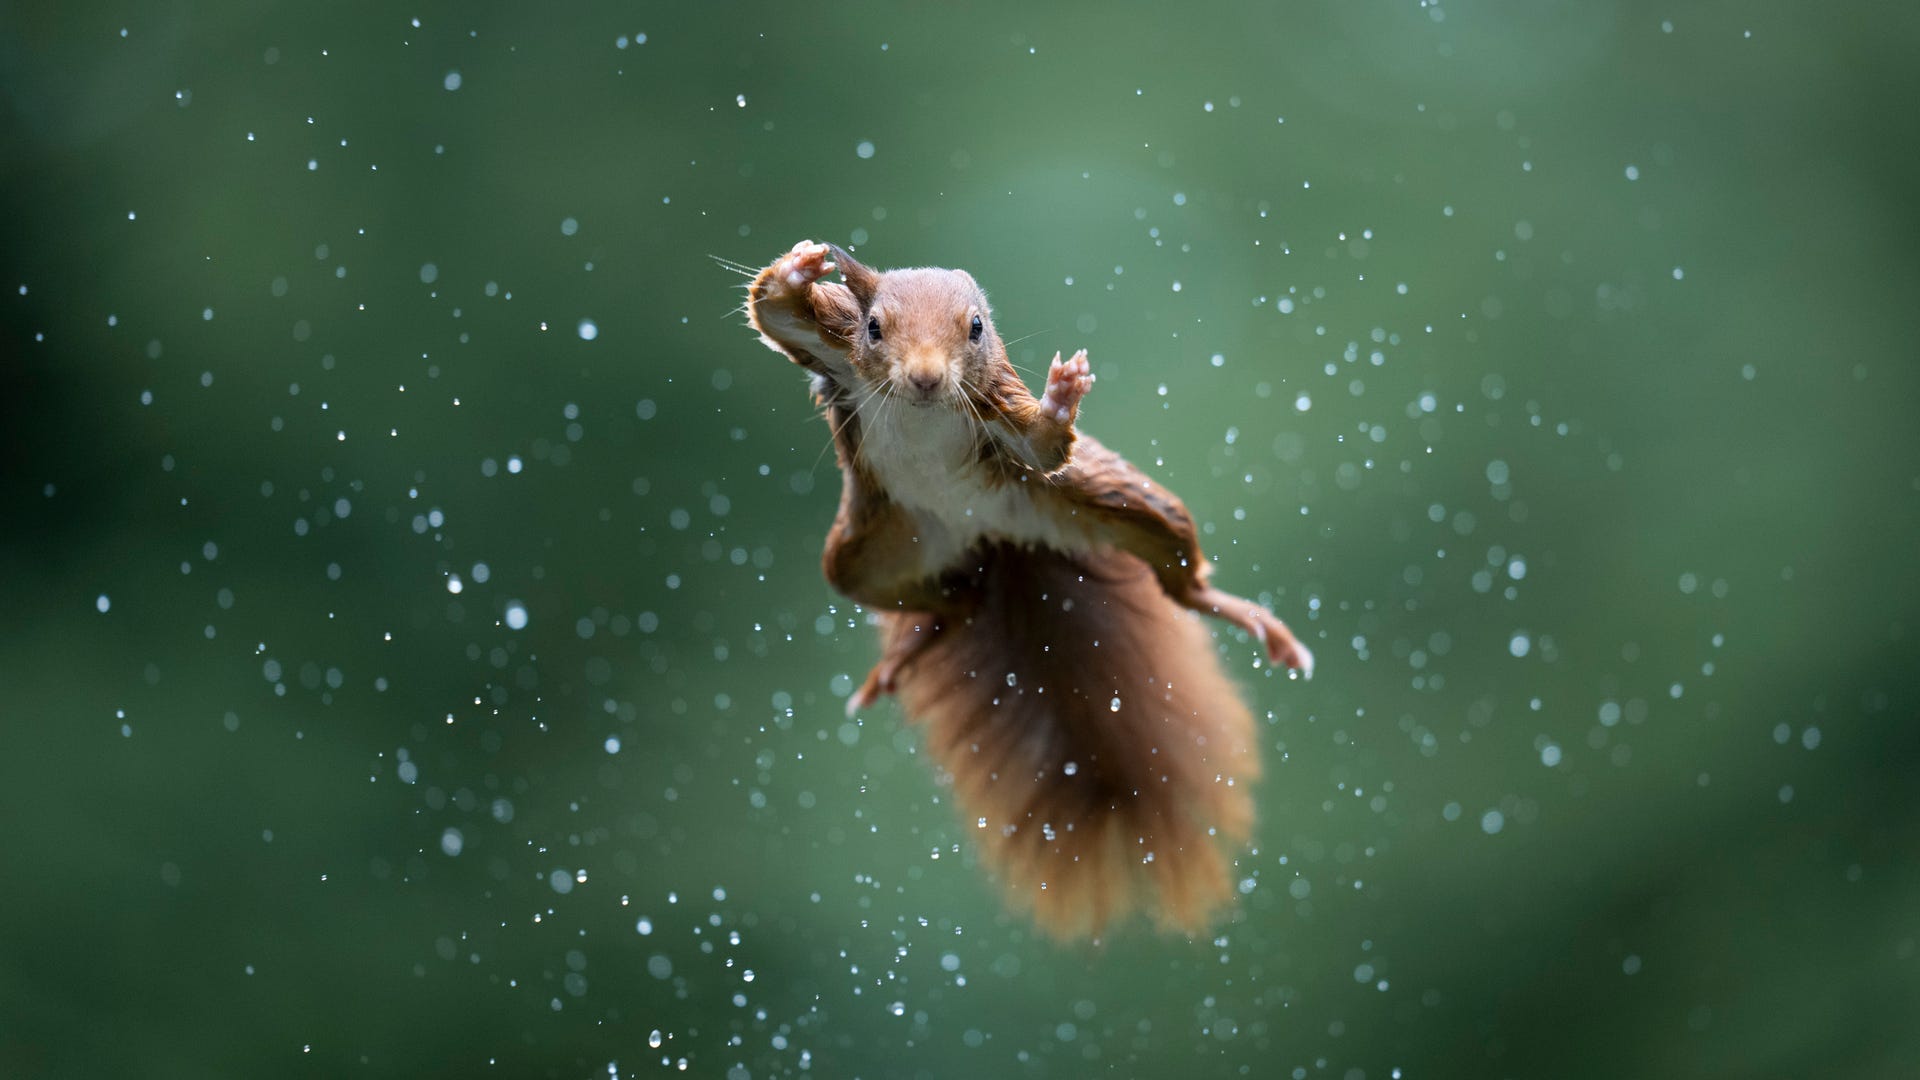 Comedy Wildlife Photography Awards Finalists Bring the Laughs - CNET